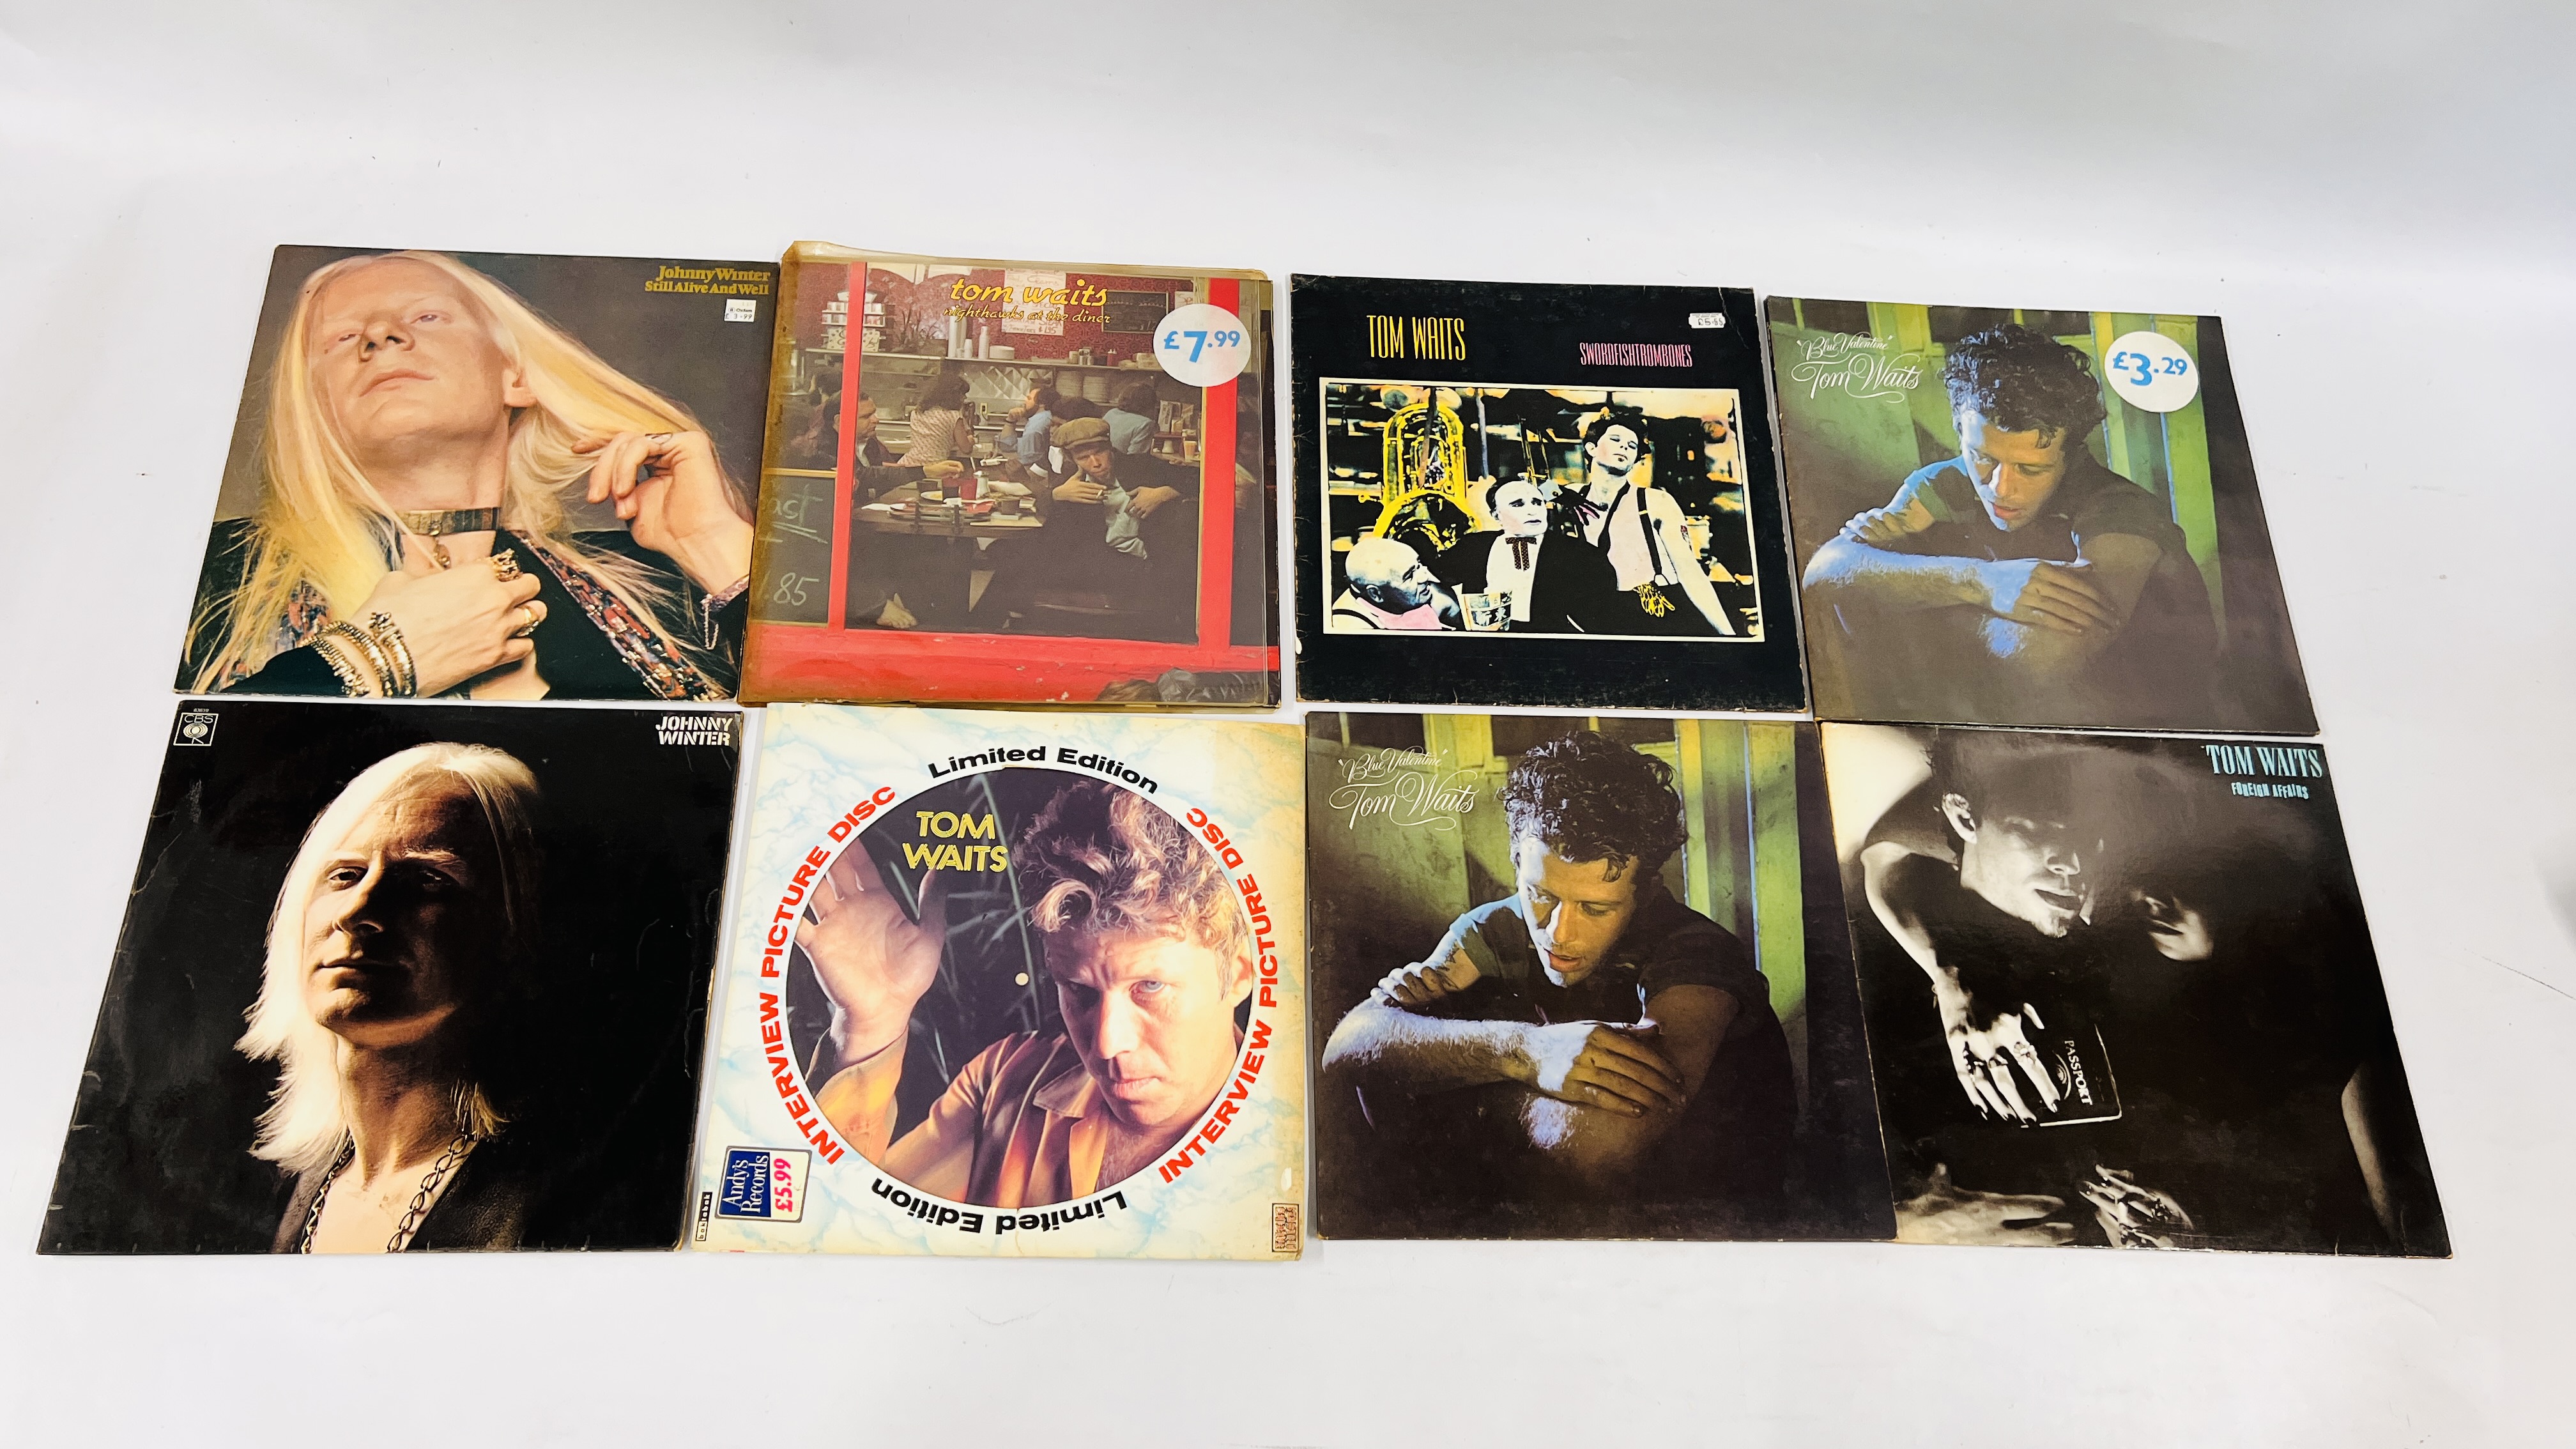 2 BOXES CONTAINING AN EXTENSIVE COLLECTION OF MAINLY 70'S AND 80'S ROCK MUSIC TO INCLUDE ROLLING - Image 5 of 20